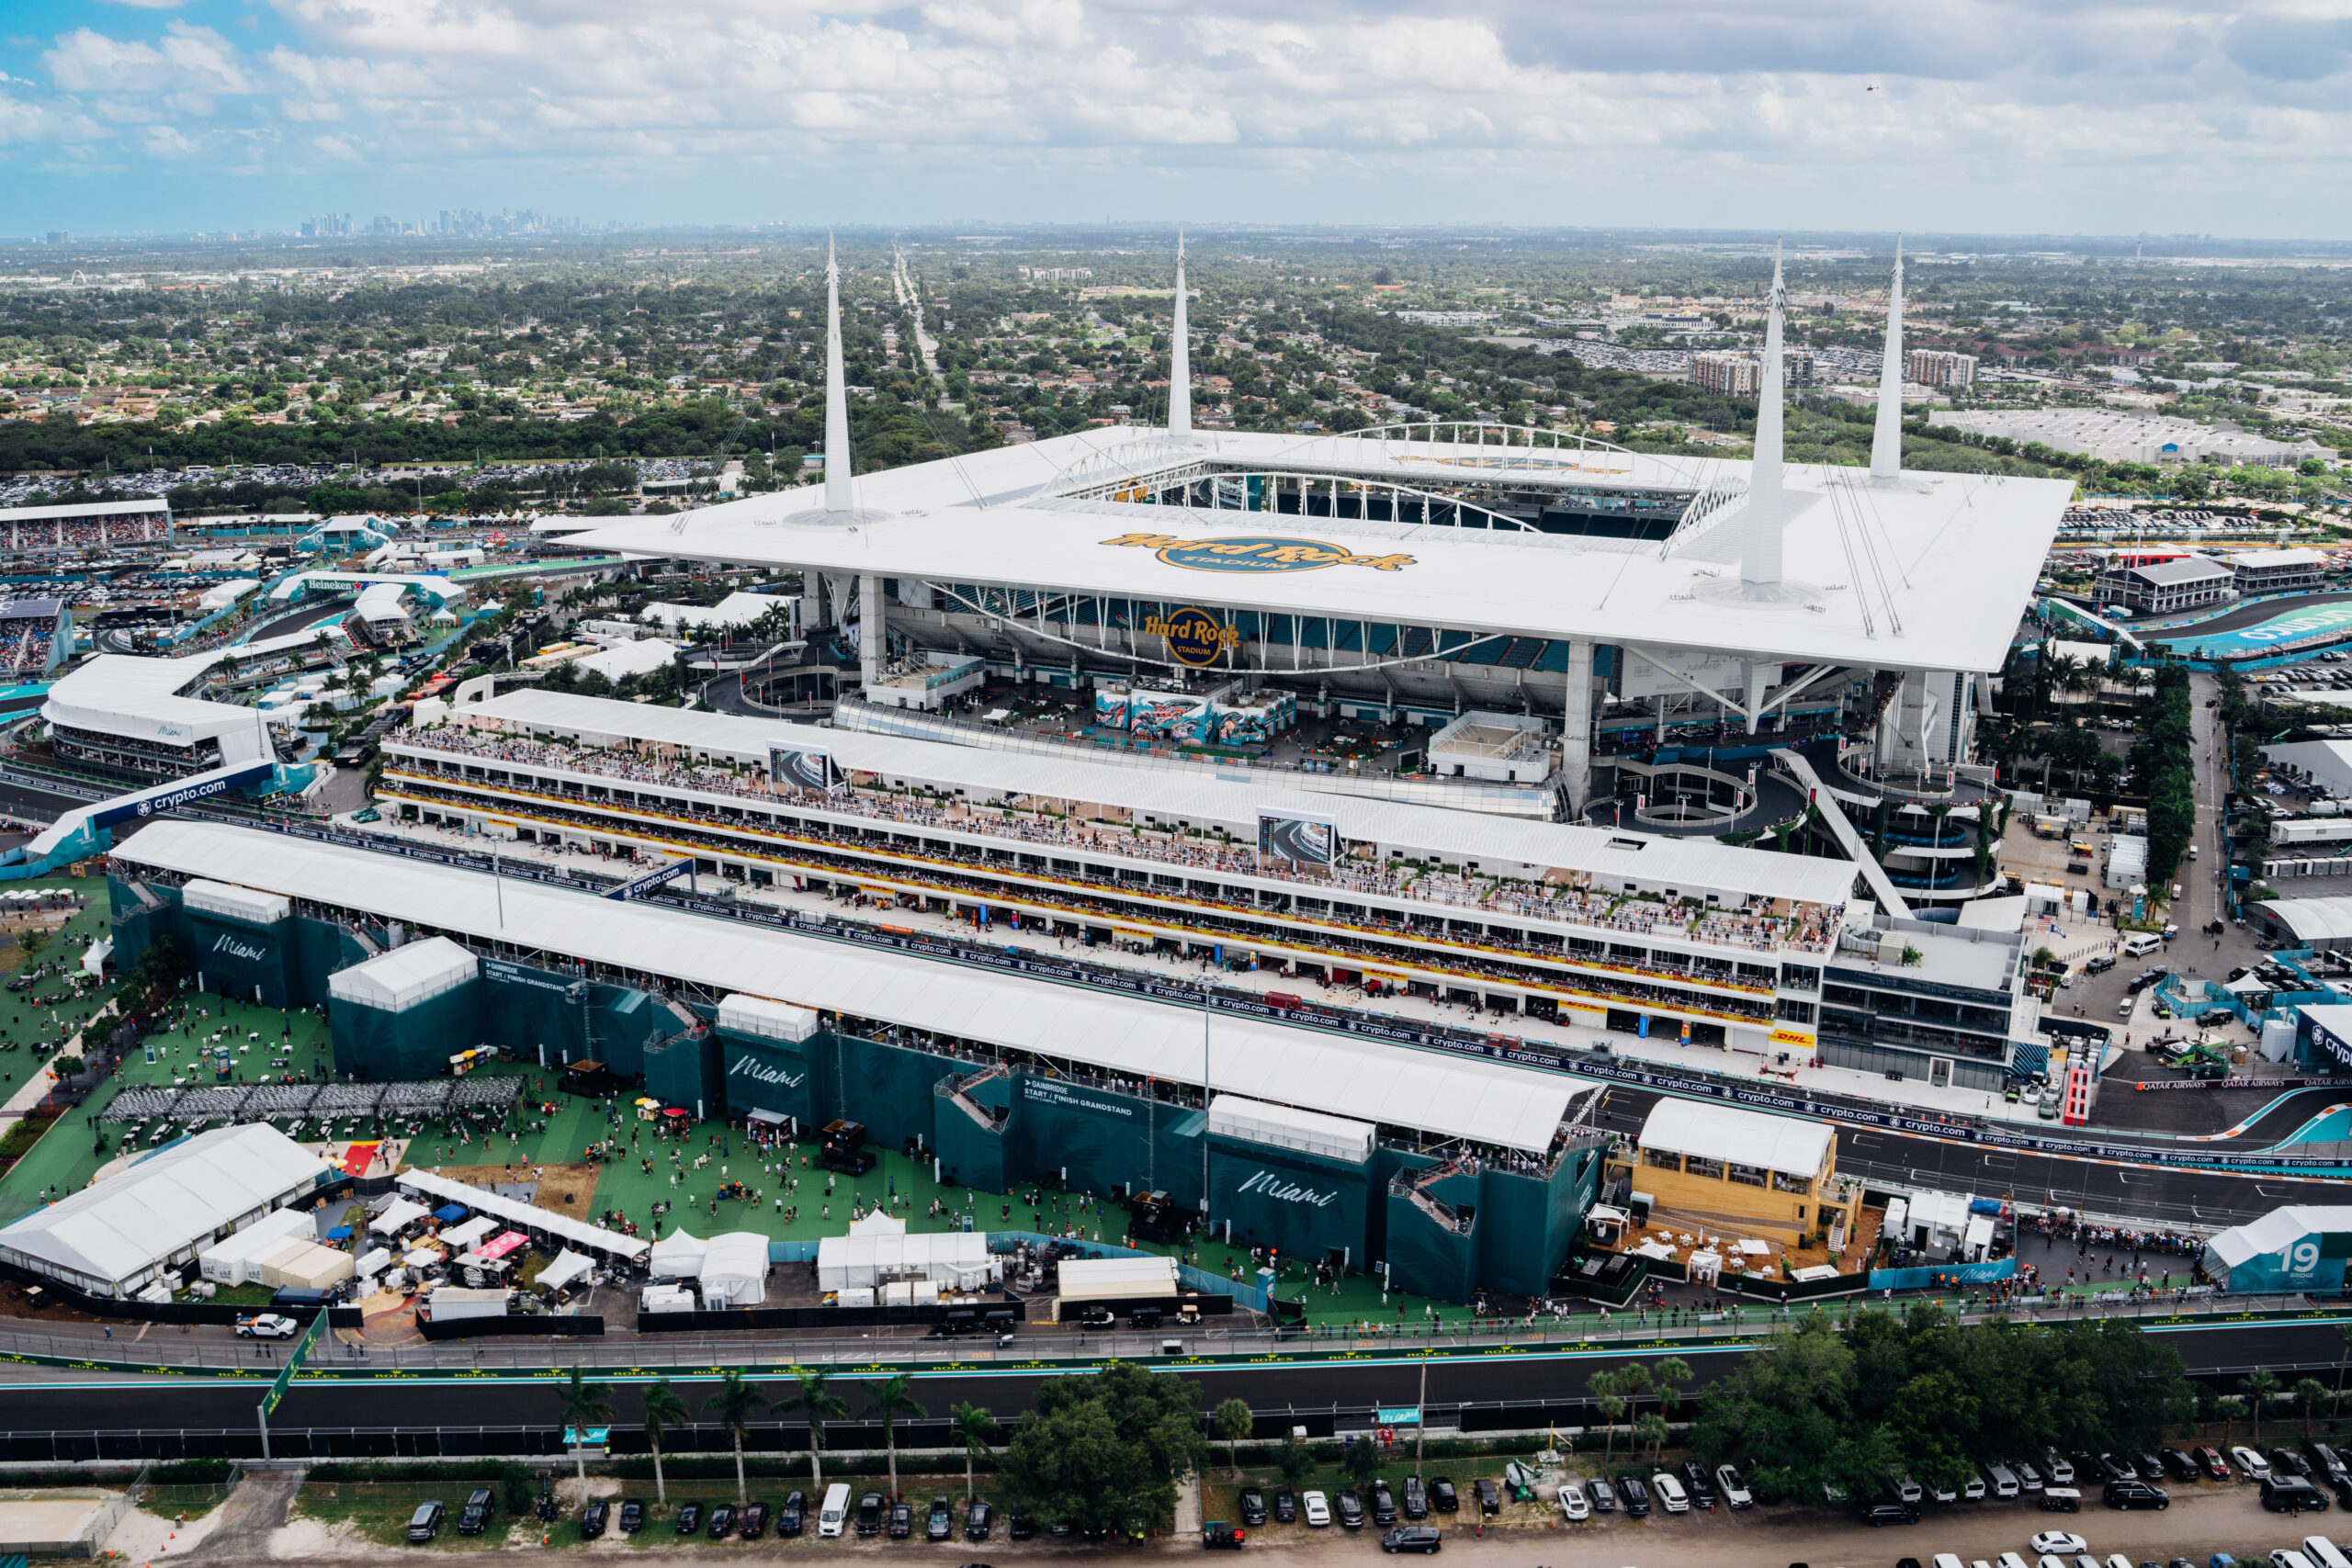 Front Office Sports on X: The F1 Miami Grand Prix has also announced plans  for a new Paddock Club: ▪️ 190,000 sq. ft. ▪️ Views of start/finish ▪️ Over  6,000 guests ▪️